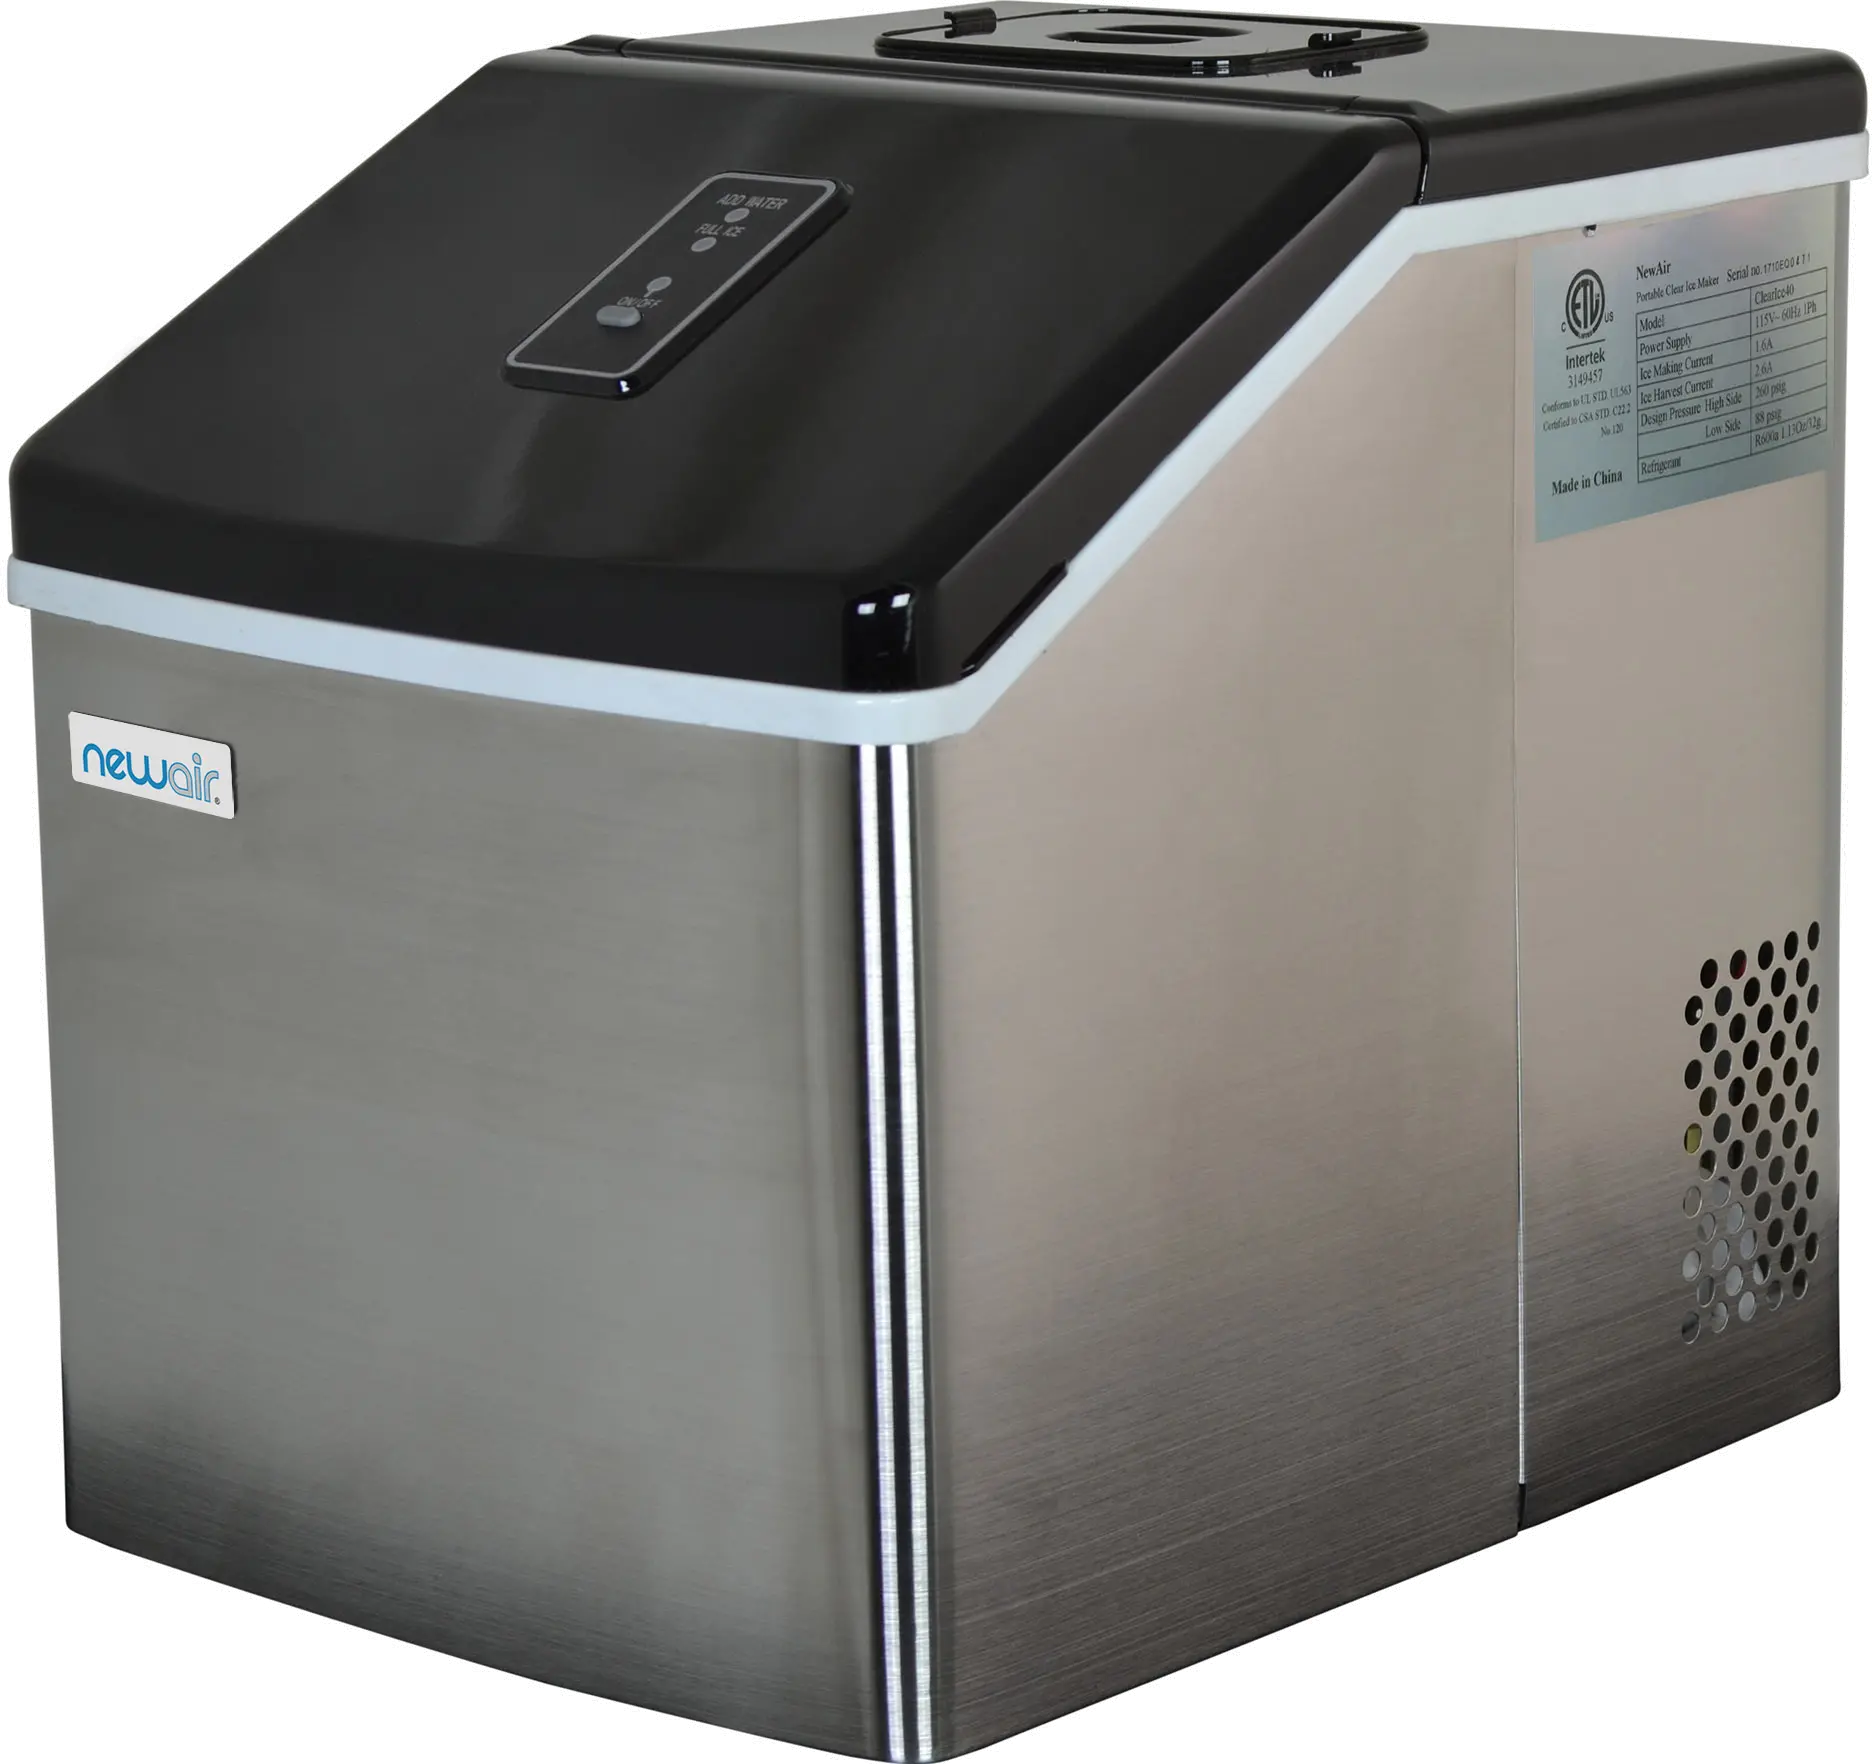 New Air Portable Countertop Ice Maker - Stainless Steel